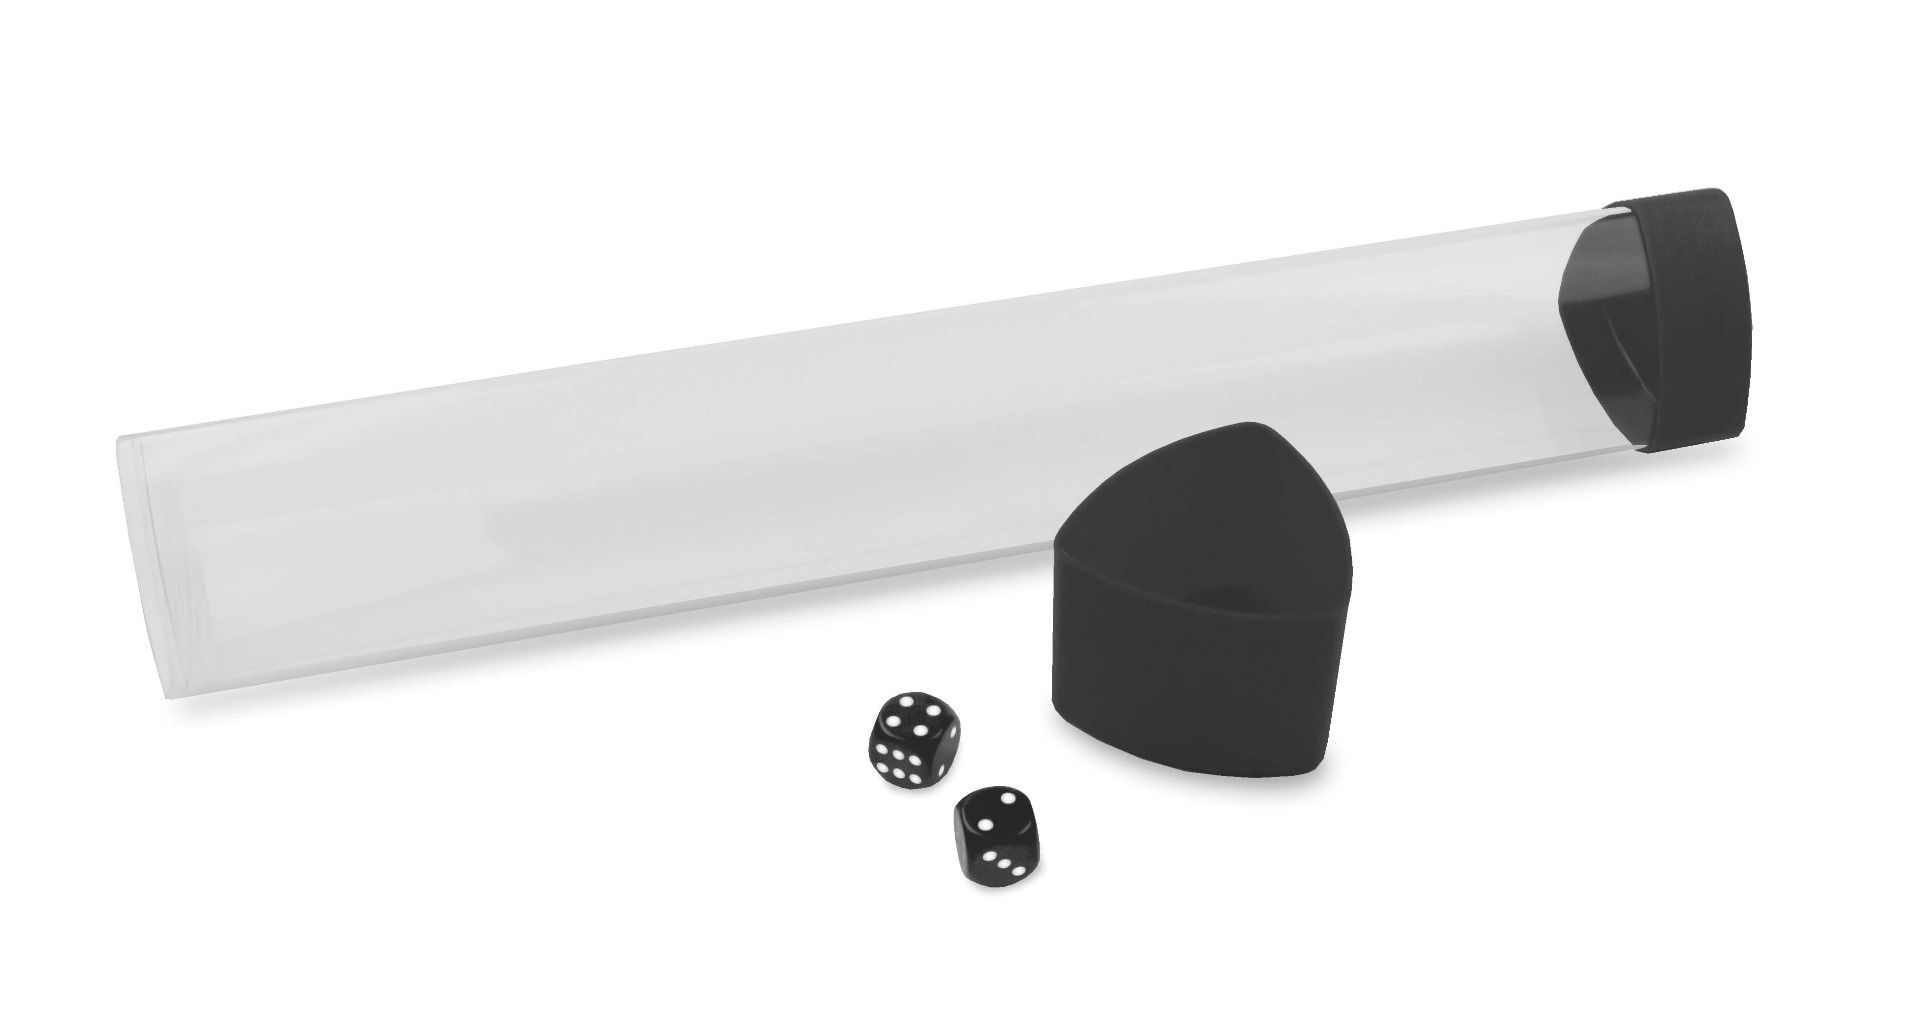 BCW Playmat Tube with Dice Holder | Gate City Games LLC